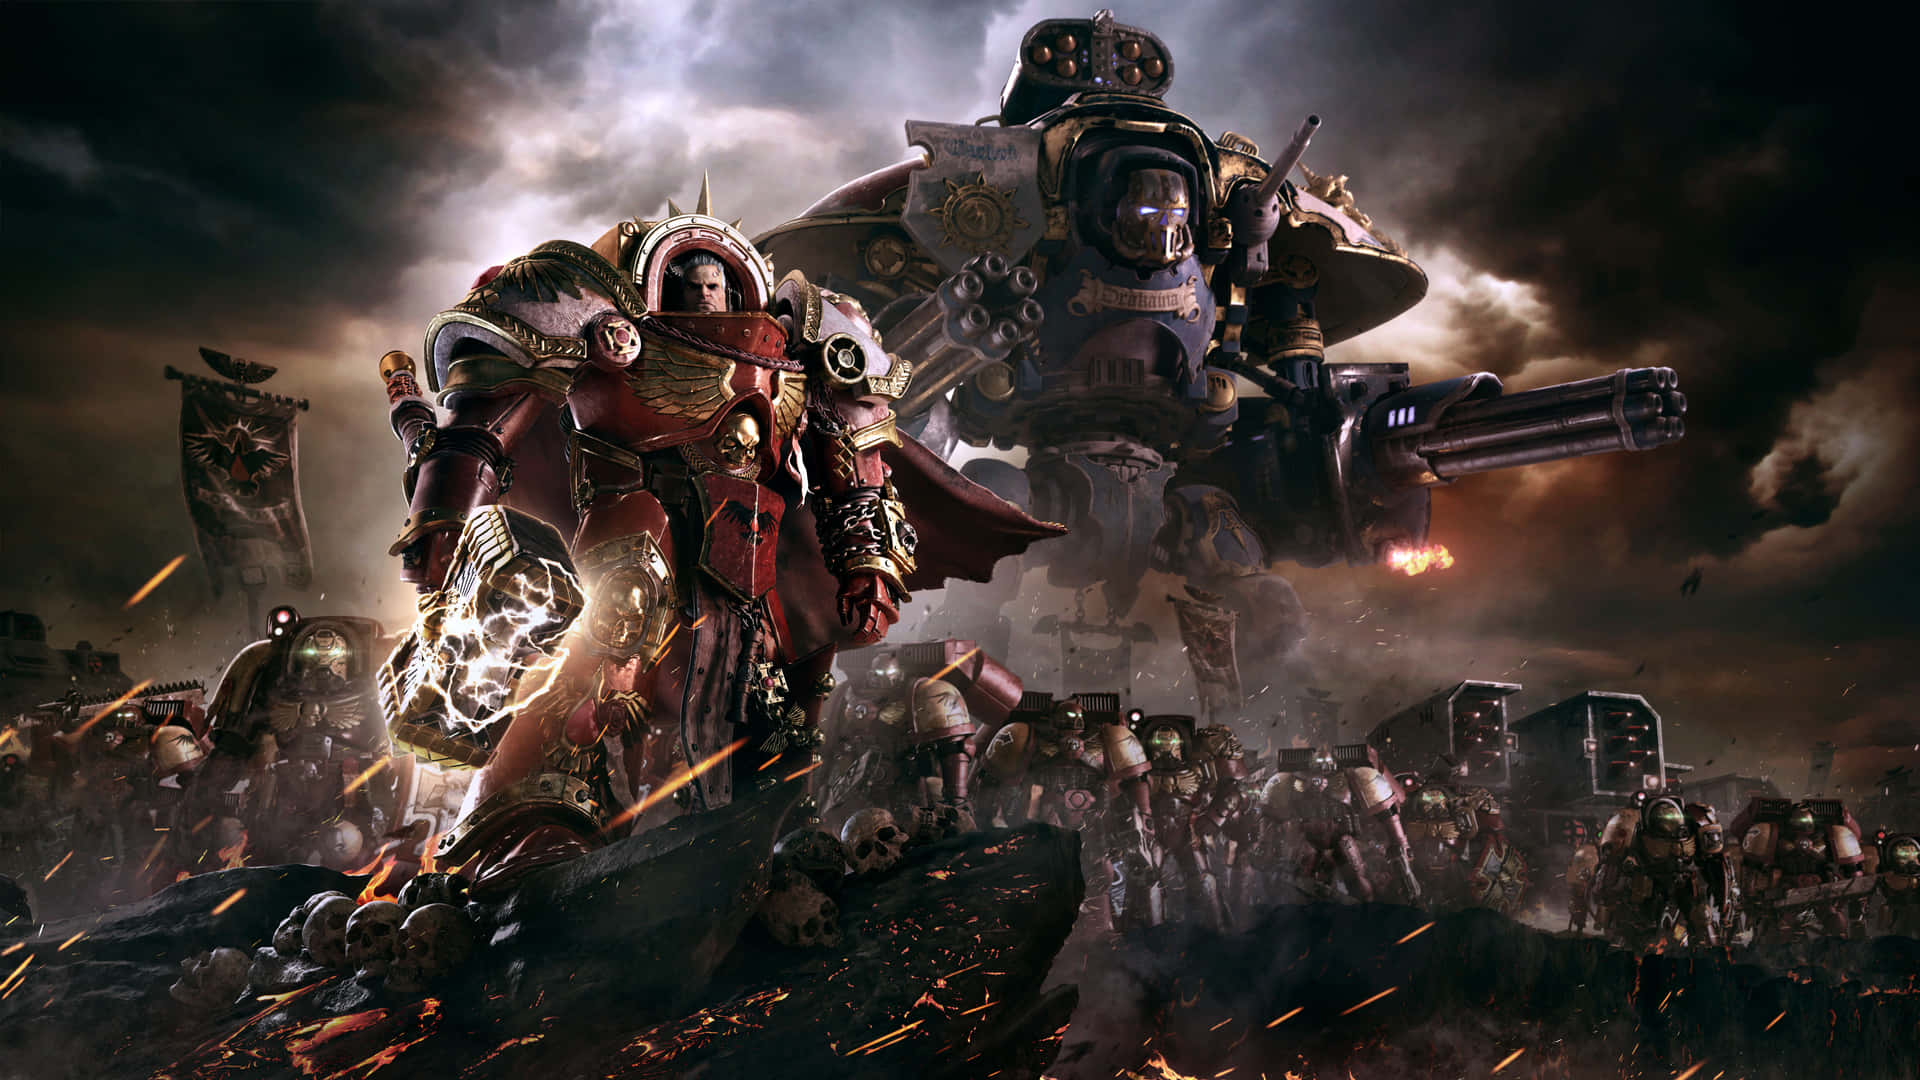 "A Hero's Call to War - Join the fight with Warhammer 4k" Wallpaper